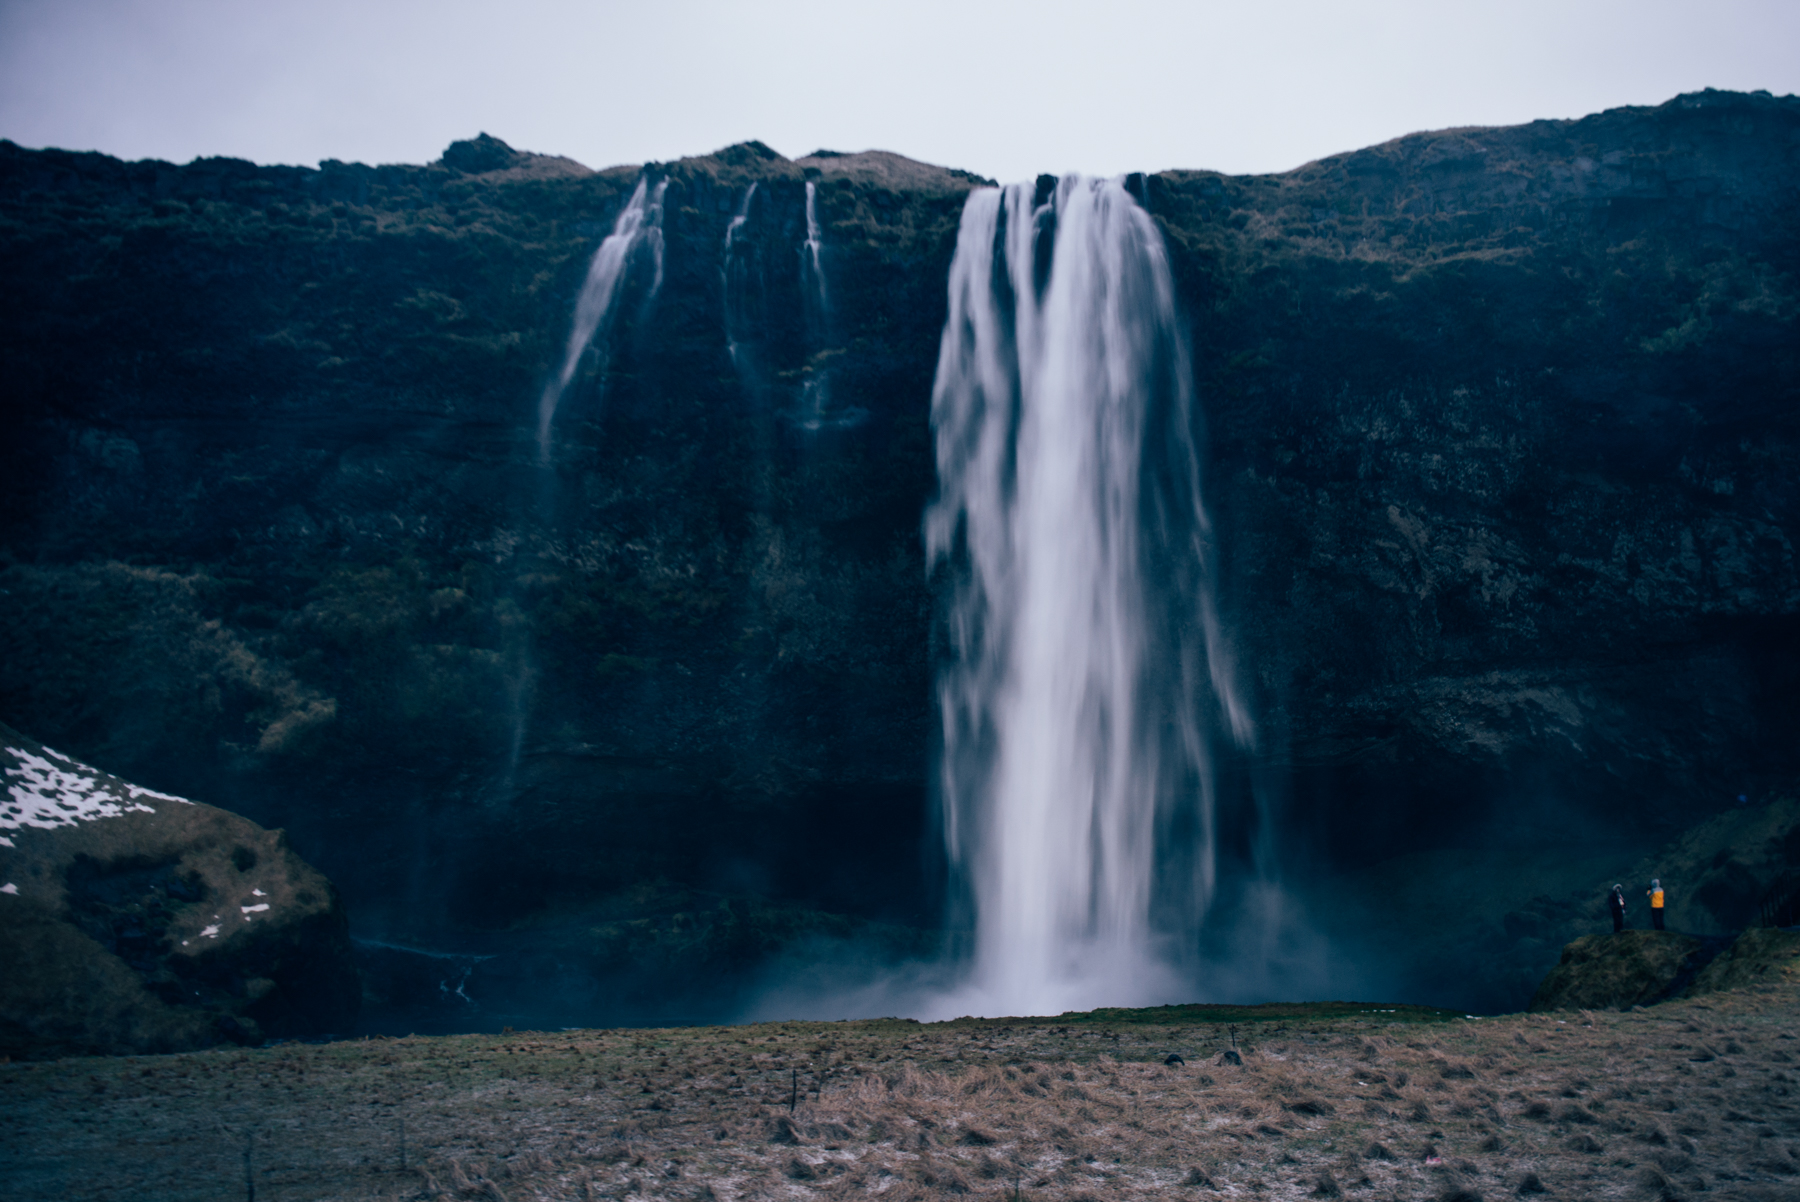 Iceland – Seljalandsfoss. Trip to Iceland with Katie and Holly 1/1-1/7.